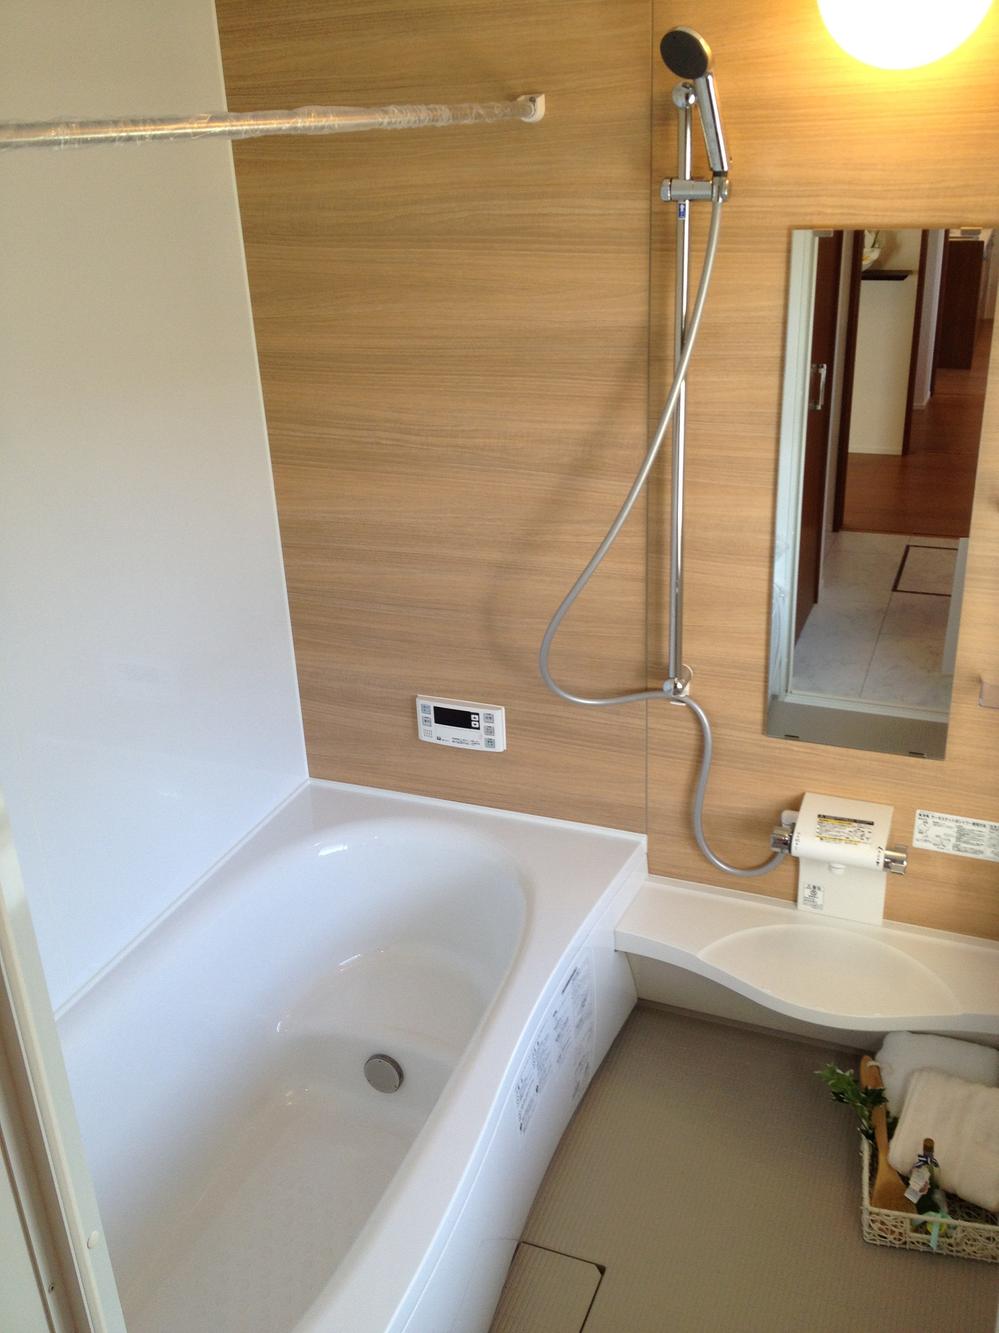 Bathroom. The spacious bathroom is spacious also entered in the parent and child. Leisurely will heal the fatigue of the day (August 2013 shooting)